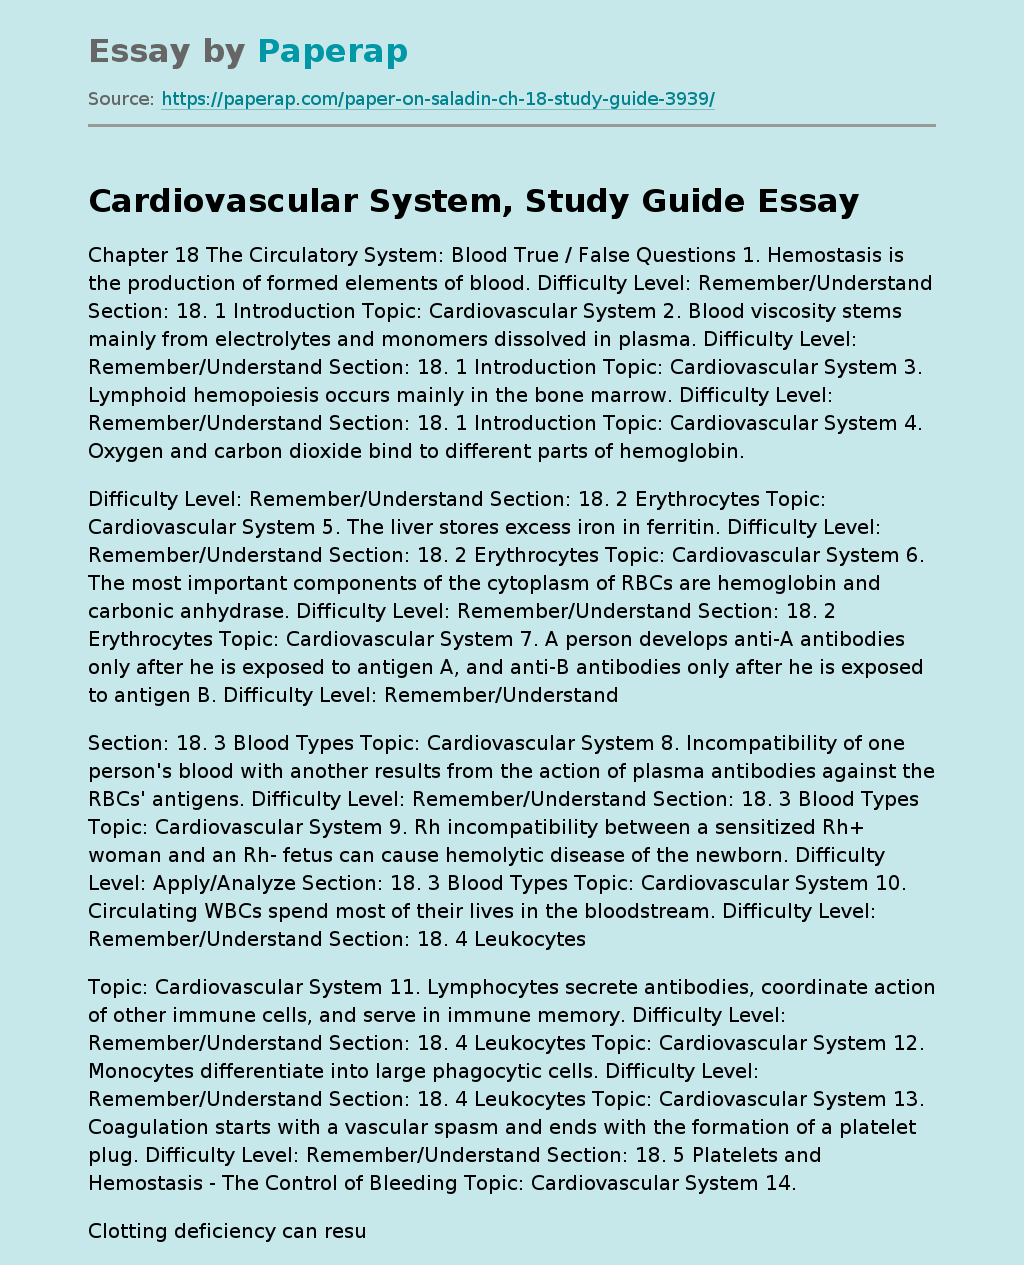 Cardiovascular System, Study Guide